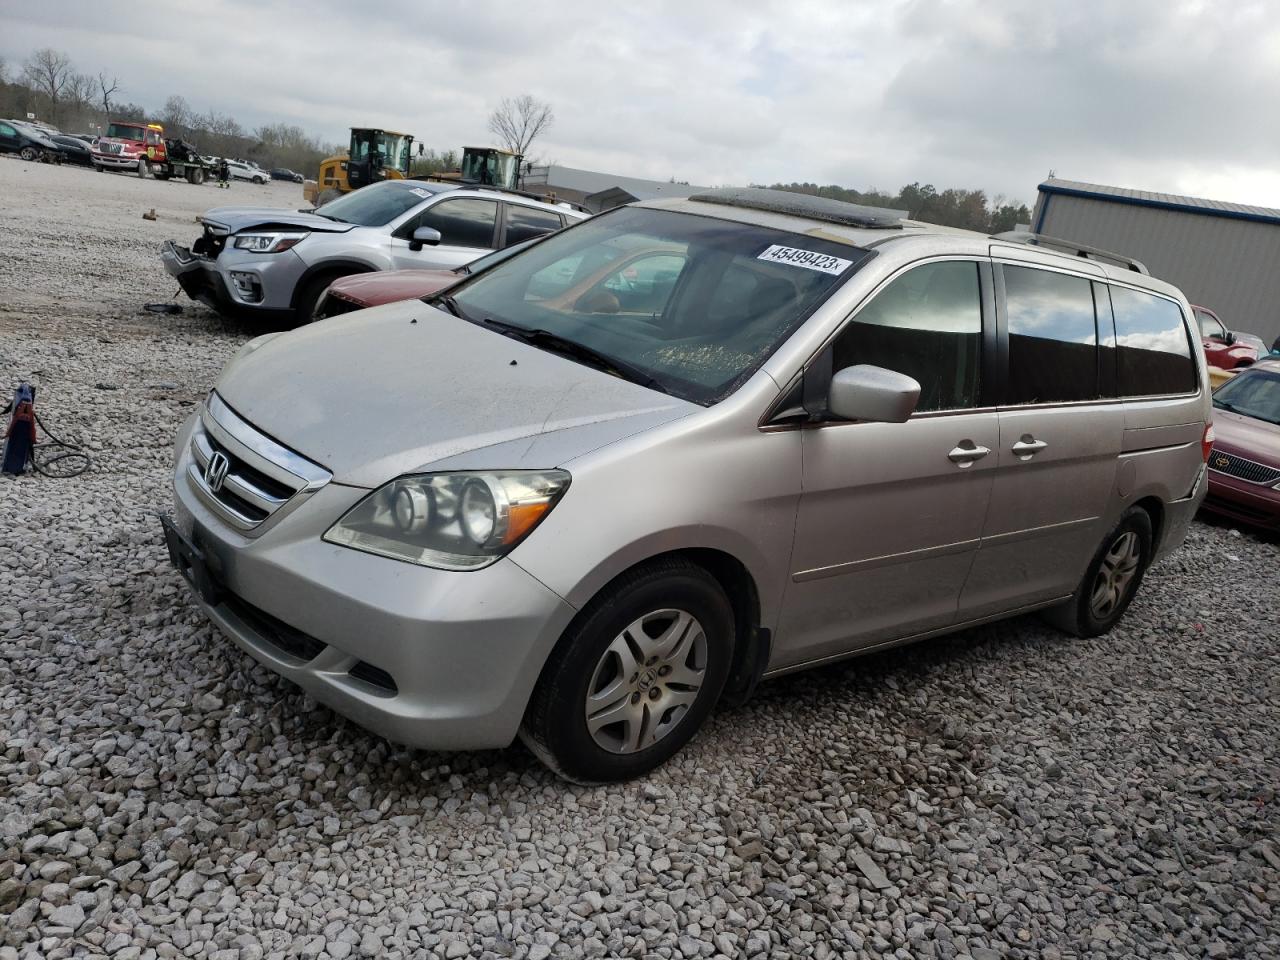 5FNRL386X7B****** Salvage and Wrecked 2007 Honda Odyssey in AL - Hueytown